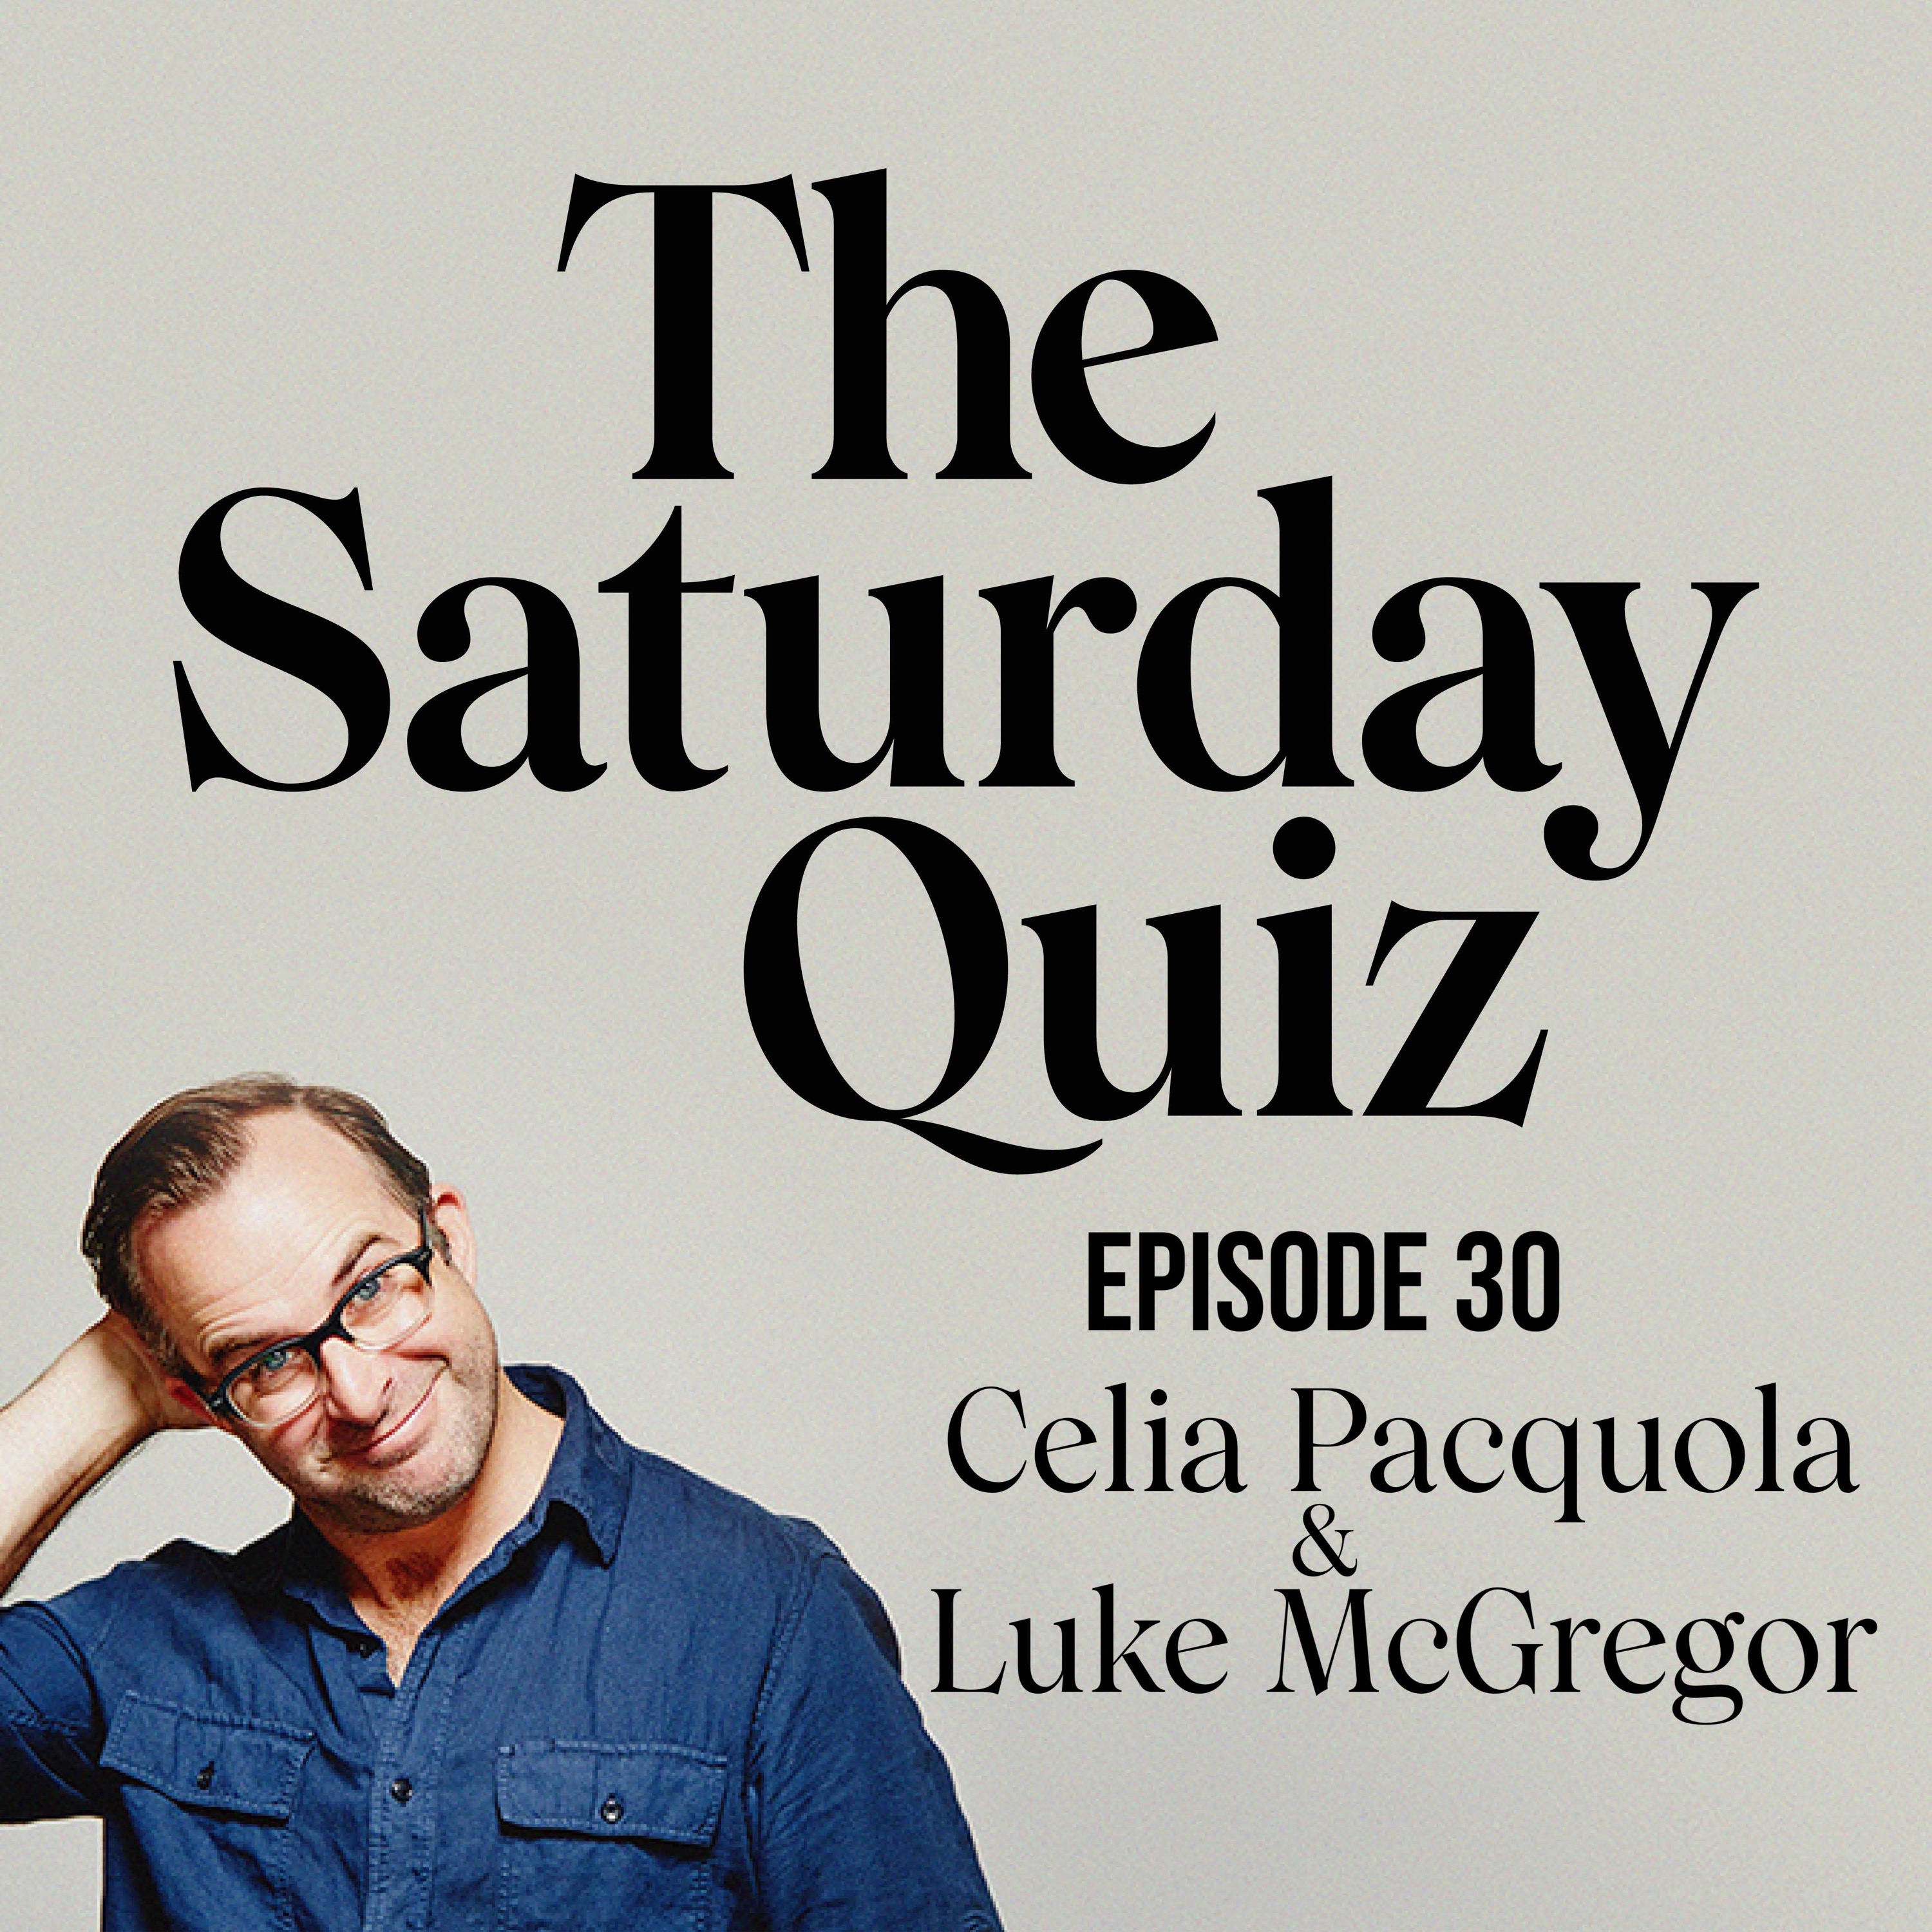 Back Again with Celia Pacquola and Luke McGregor